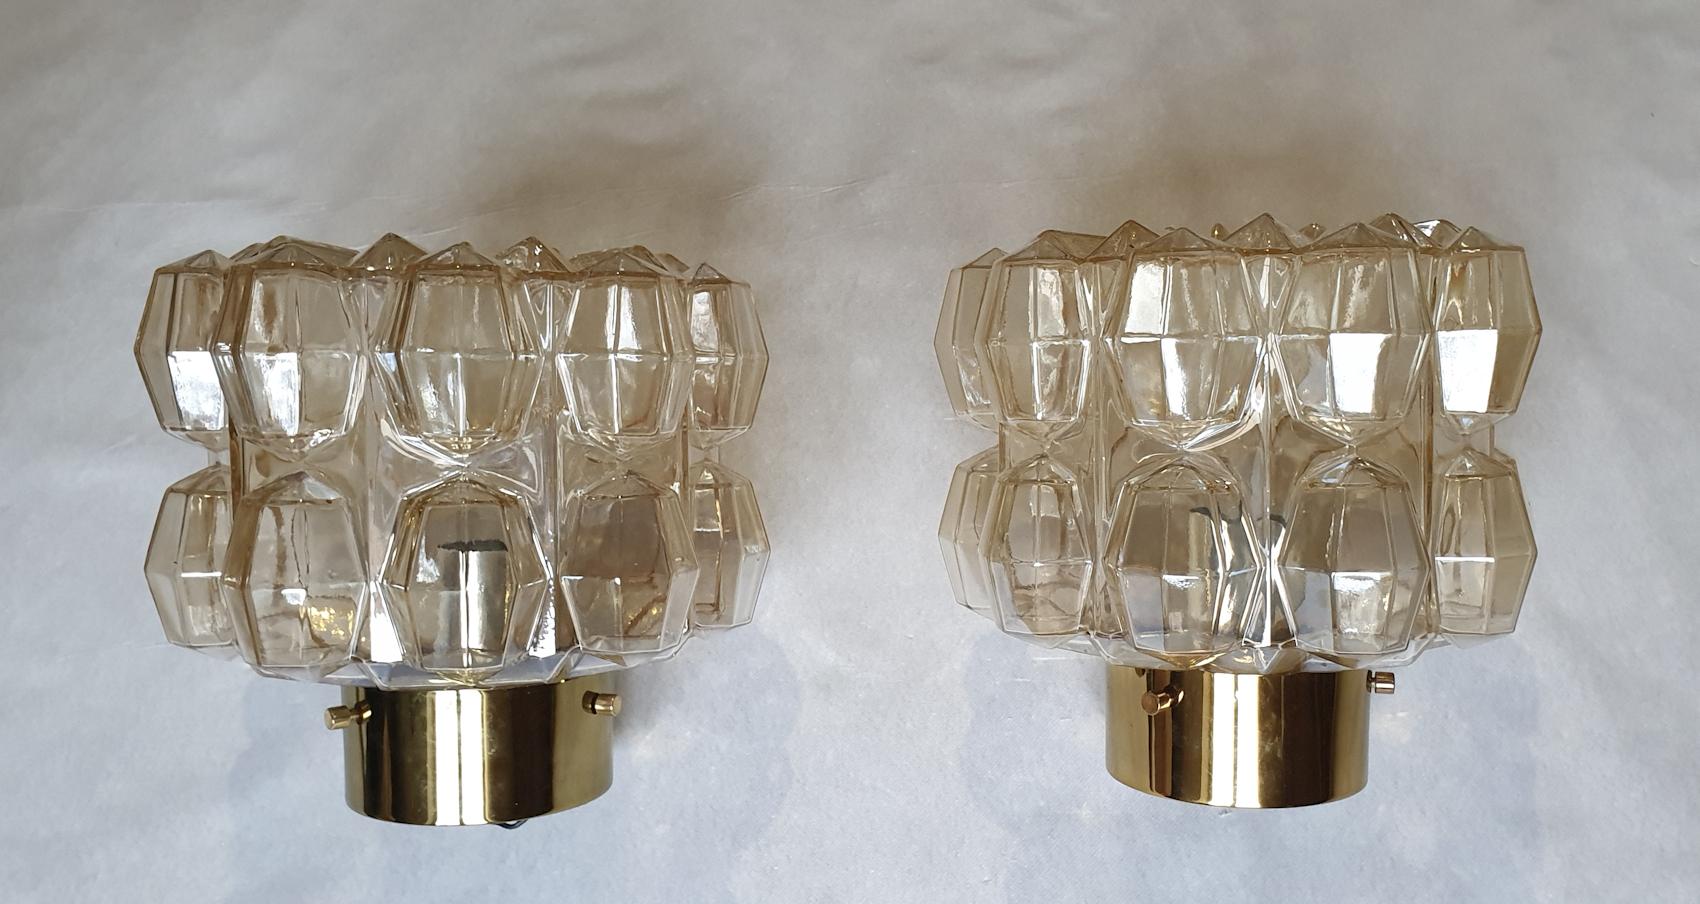 Pair of small stamped and signed Mid-Century Modern flush-mount lights or wall sconces, by Helena Tynell for Limburg.
Germany 1960s.
Made of sculpted beige/smoked Murano glass, and brass mounts.
1 light each, rewired for the US.
Creates a